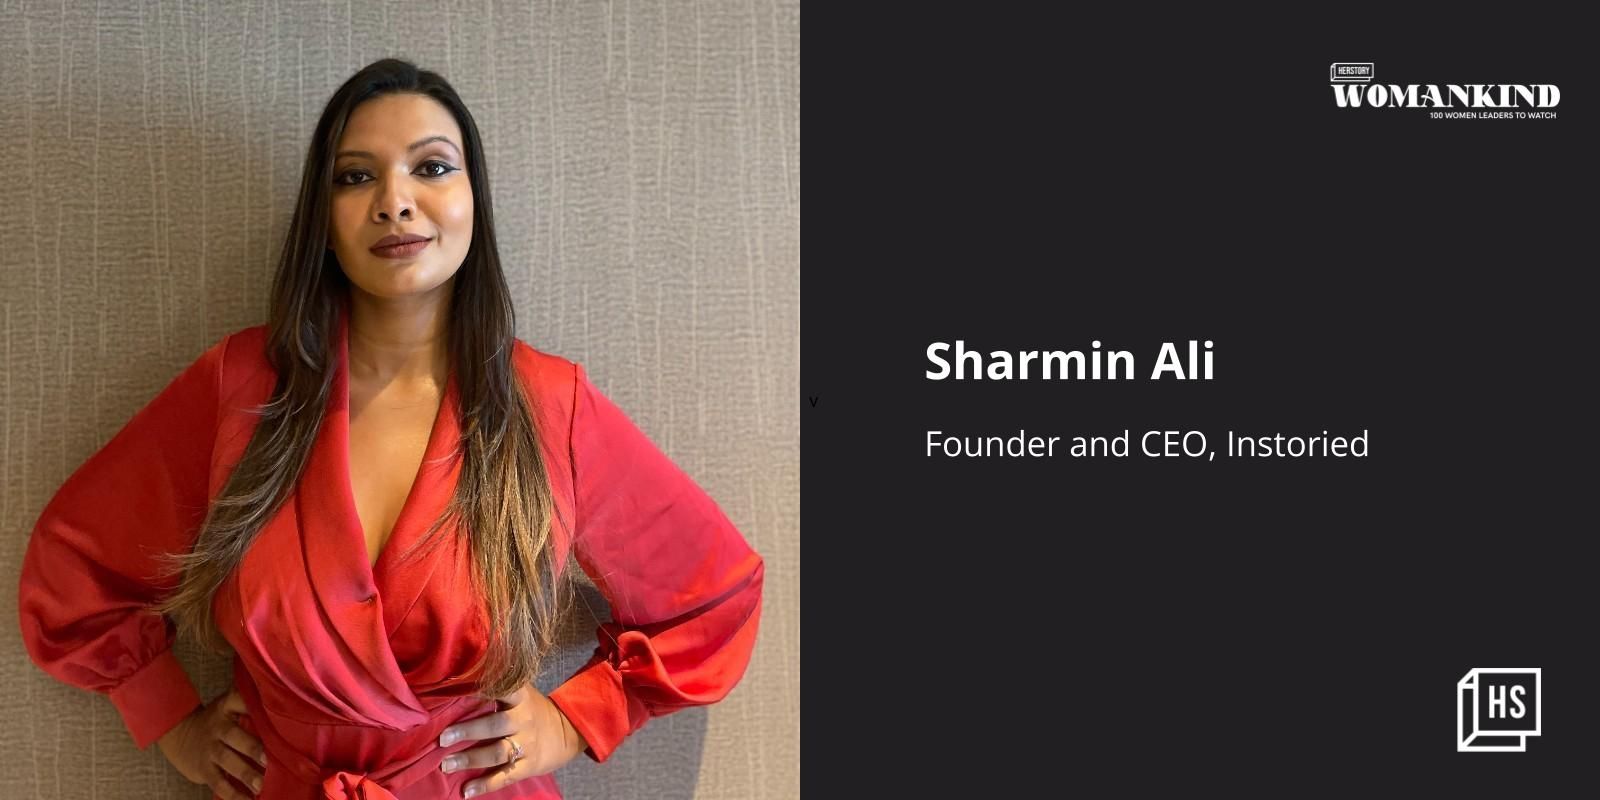 [100 Emerging Women Leaders] Learning the art of storytelling with Instoried founder Sharmin Ali